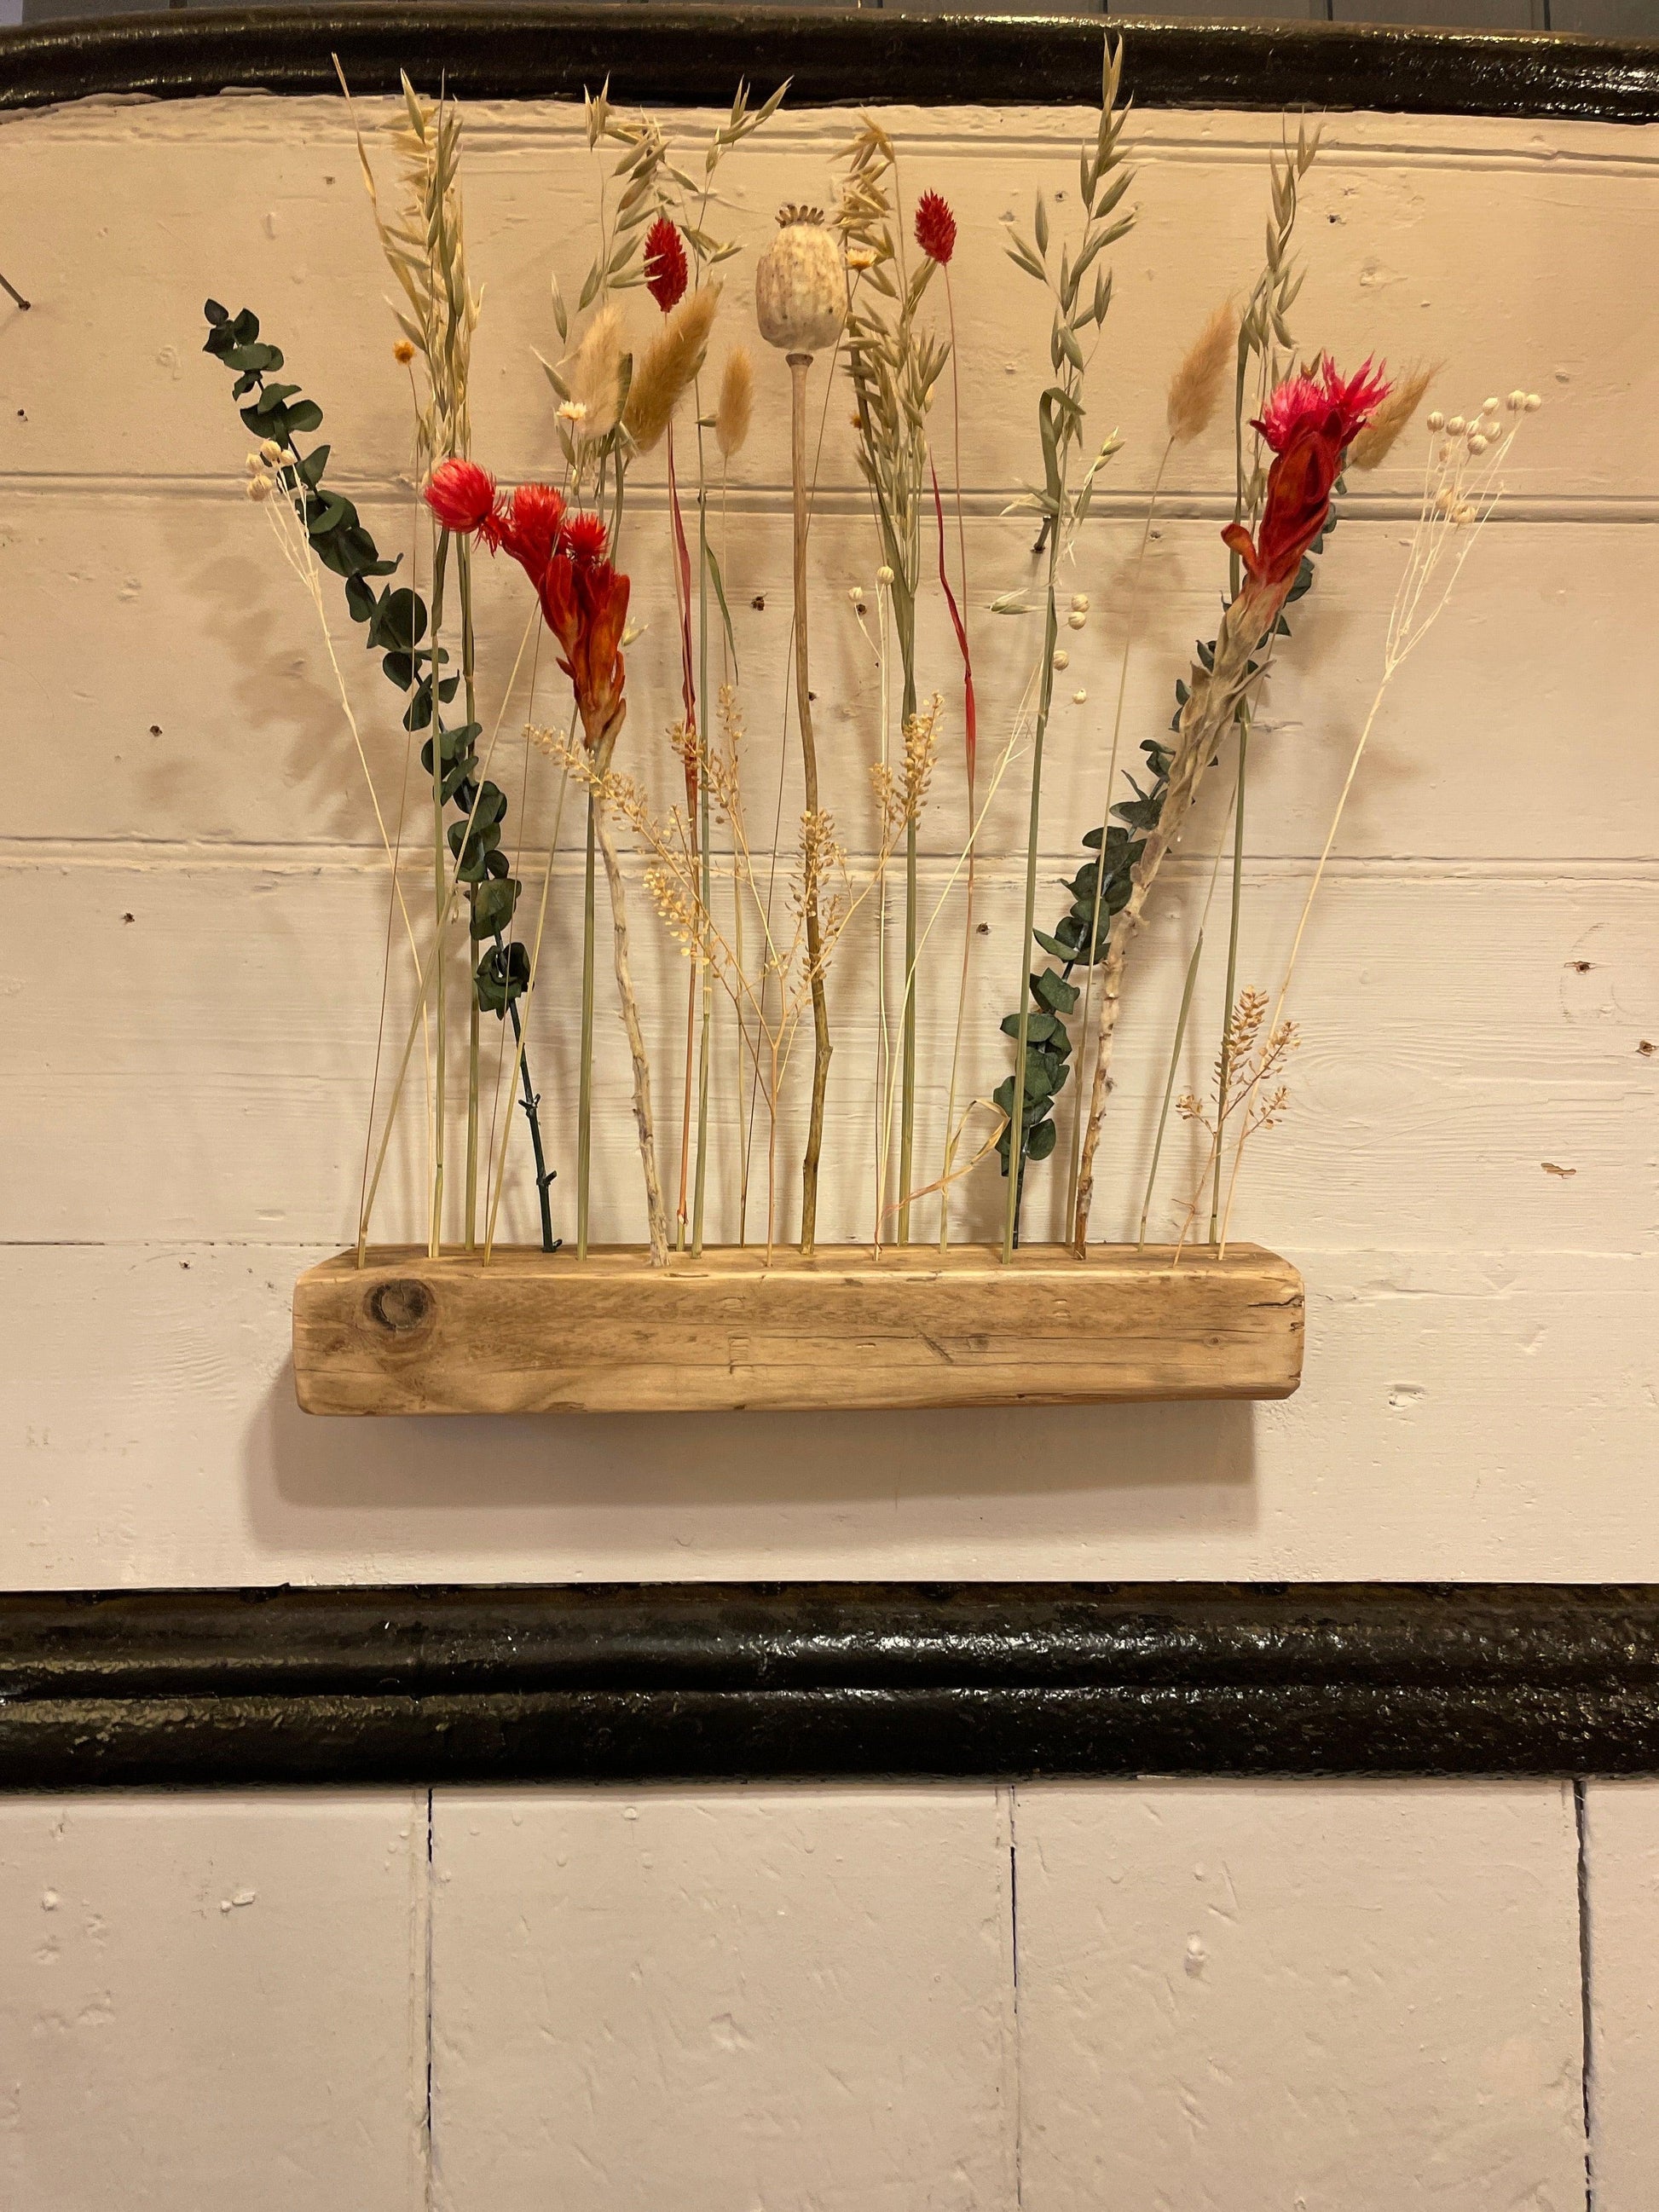 Flower Bar 40cm Reclaimed Spruce Dried Flower Wall or Table Display - MooBoo Home